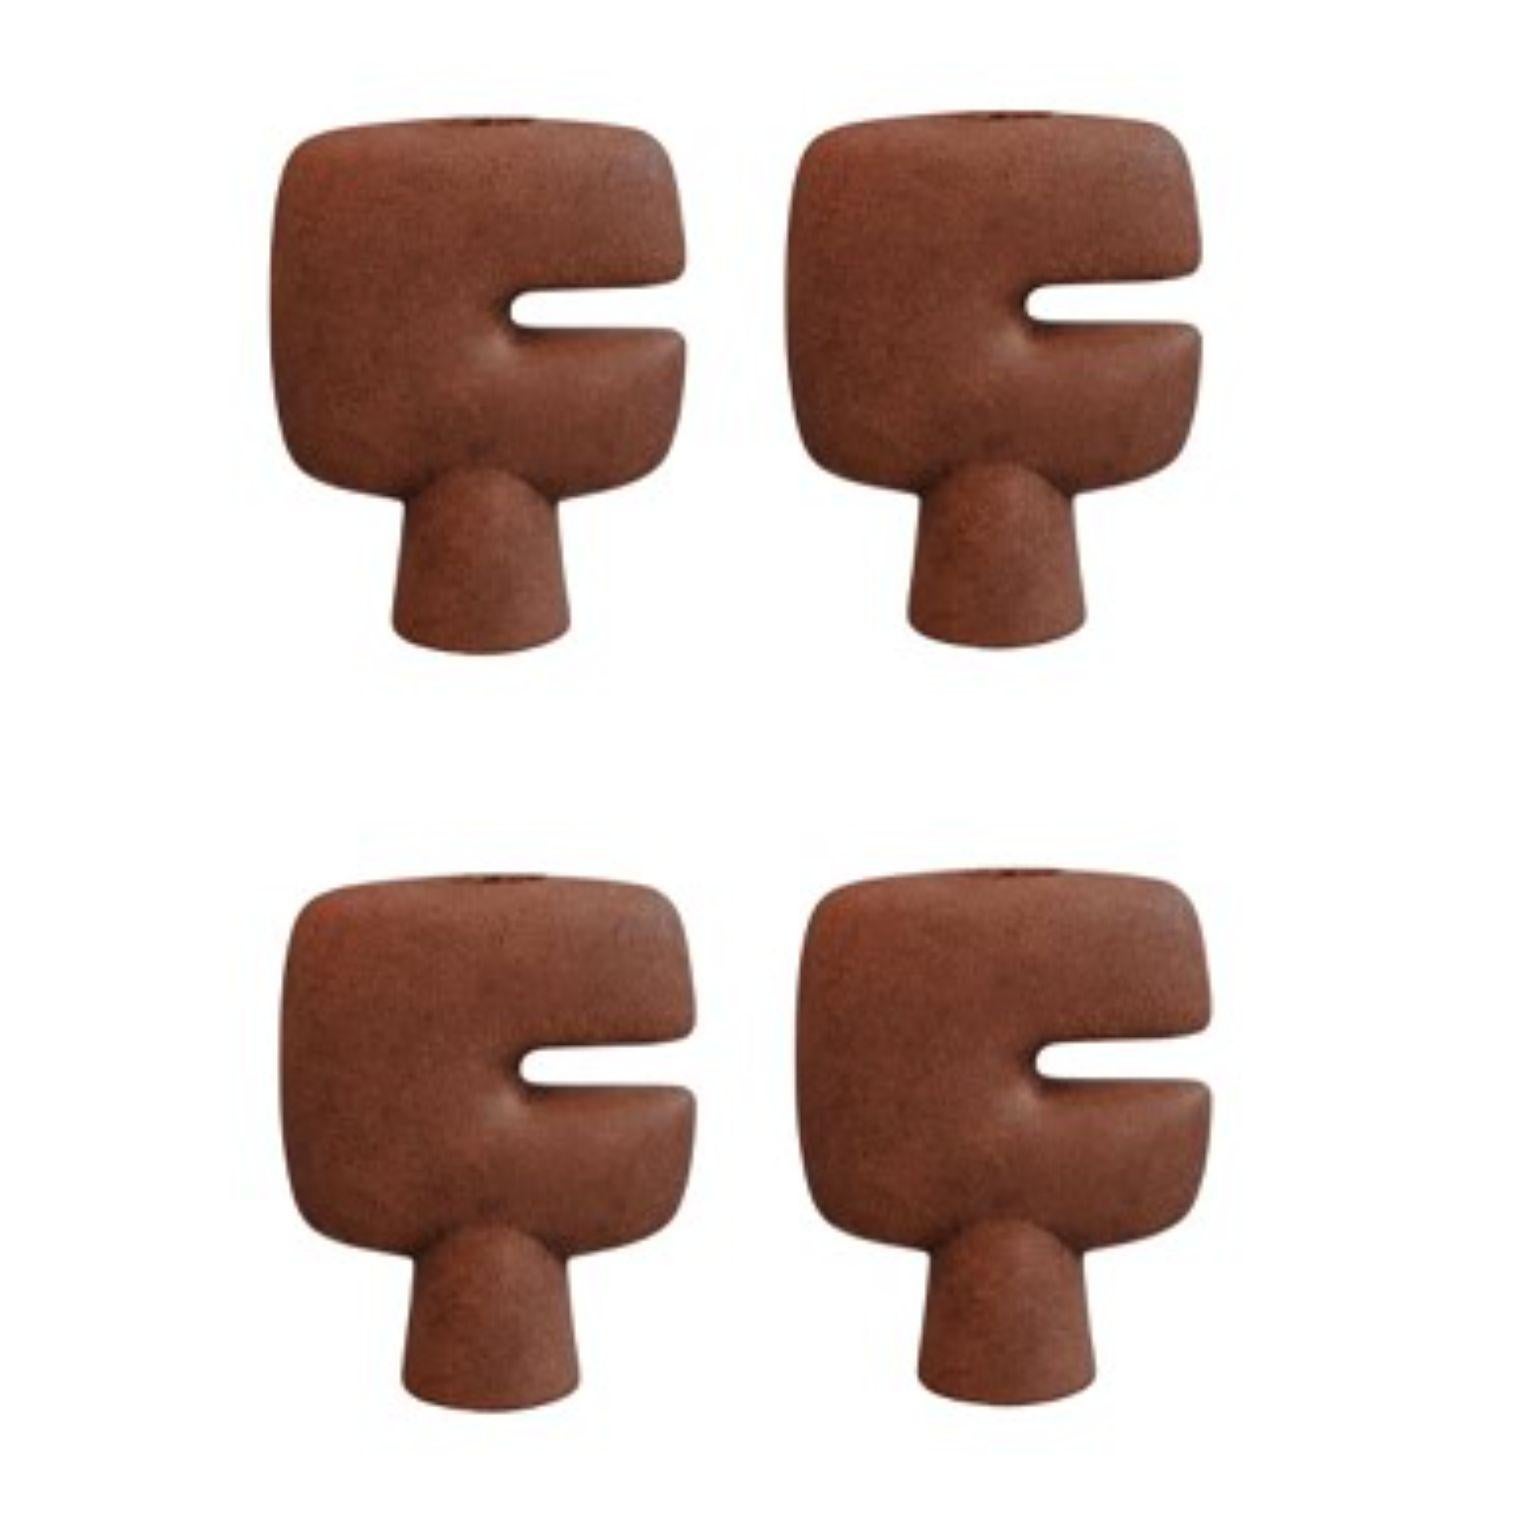 Set of 4 Terracotta Tribal vasea mini by 101 Copenhagen
Designed by Kristian Sofus Hansen & Tommy Hyldahl
Dimensions: L 21 / W 9 / H 25,5 CM
Materials: Ceramic

The Tribal collection is a series of vases designed as a sculptural take on the